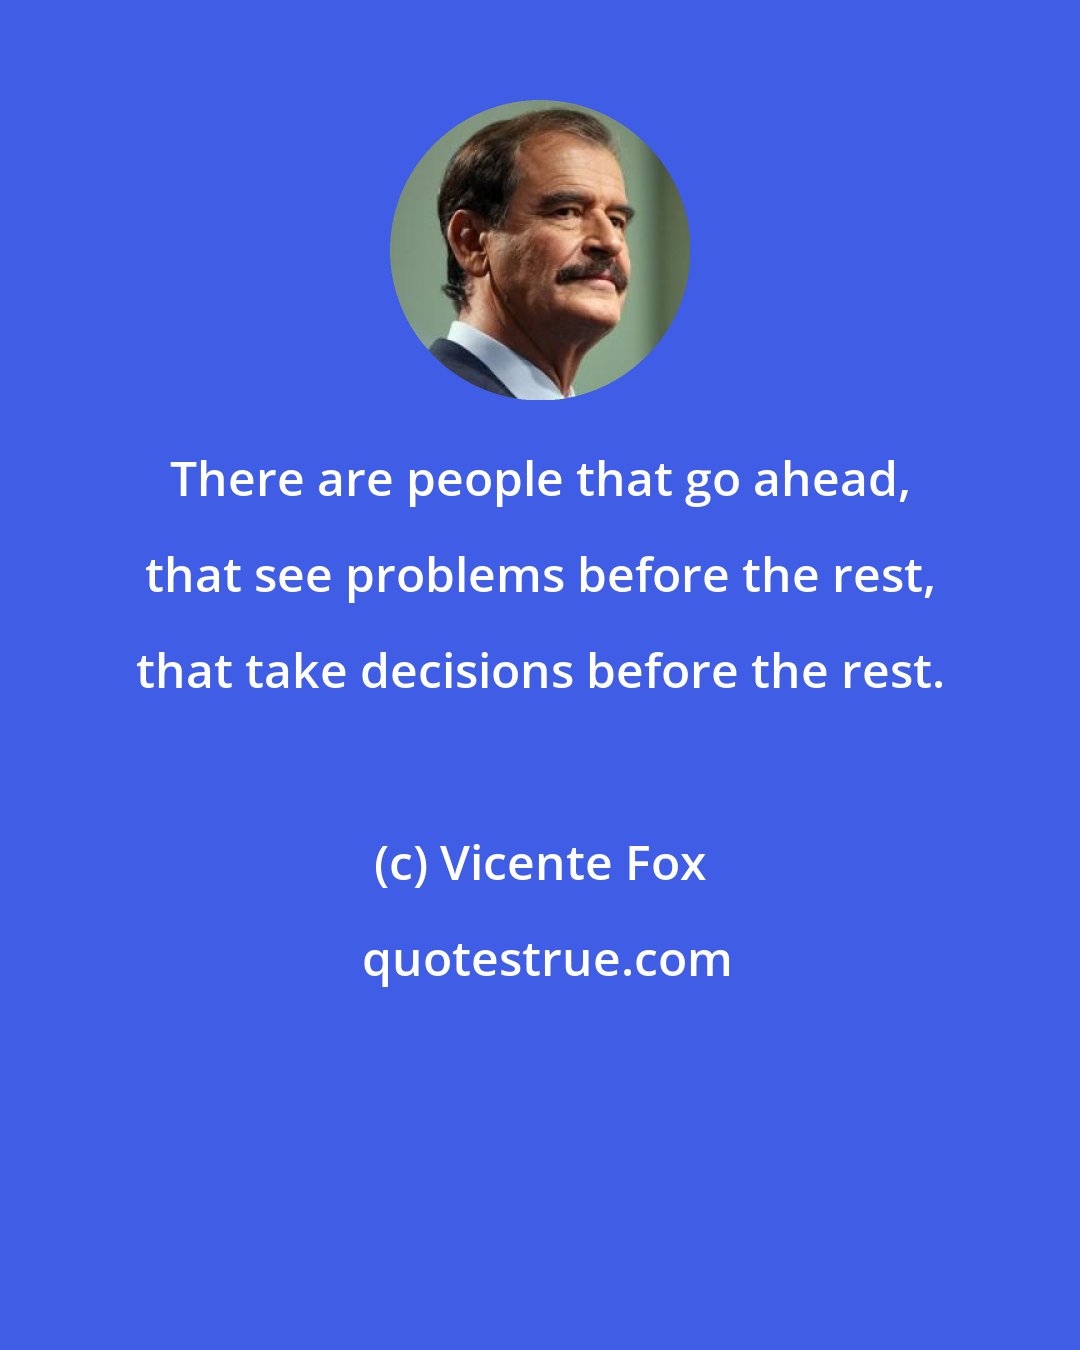 Vicente Fox: There are people that go ahead, that see problems before the rest, that take decisions before the rest.